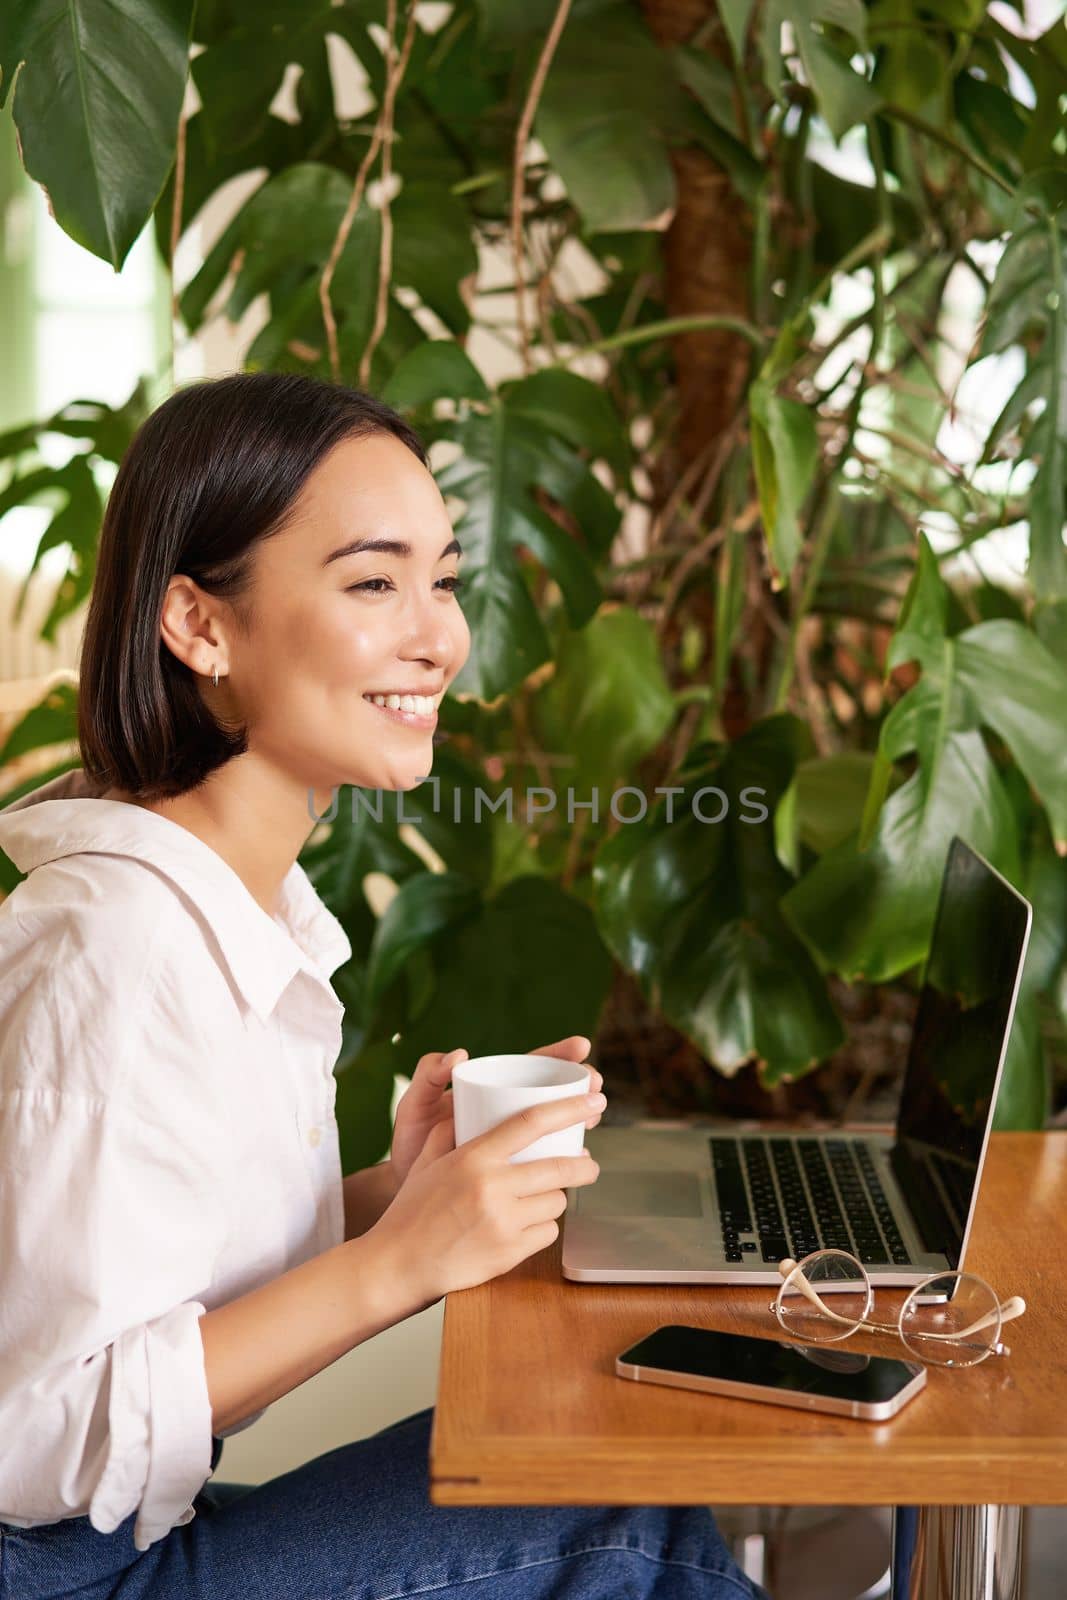 Vertical shot of beautiful woman sits in cafe with laptop, works or studies online at co-working space, smiling relaxed.